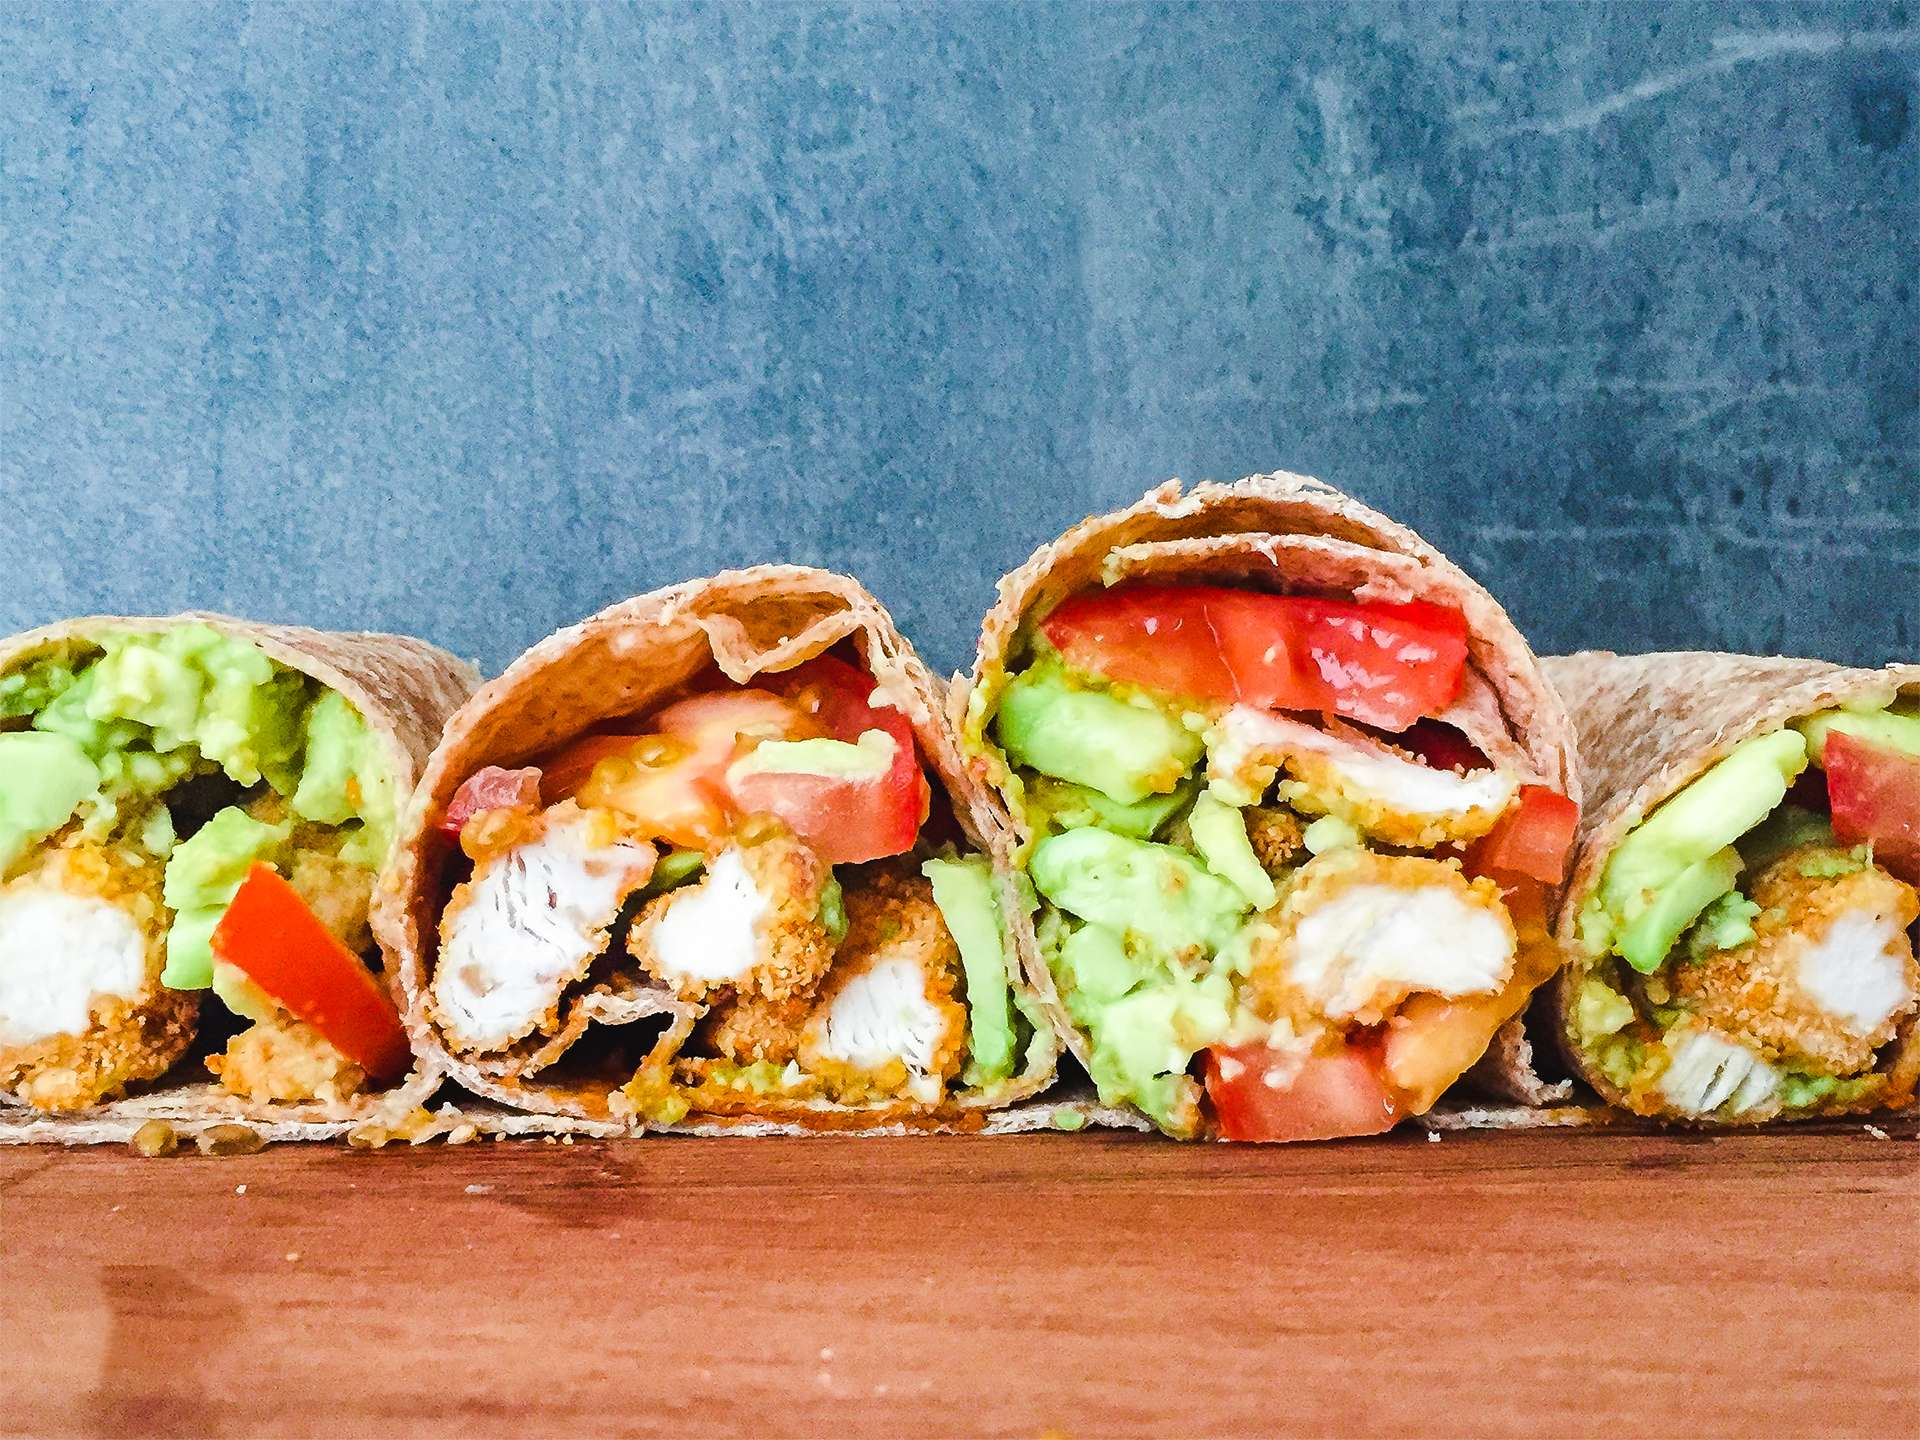 A warp with grilled chicken and avocado